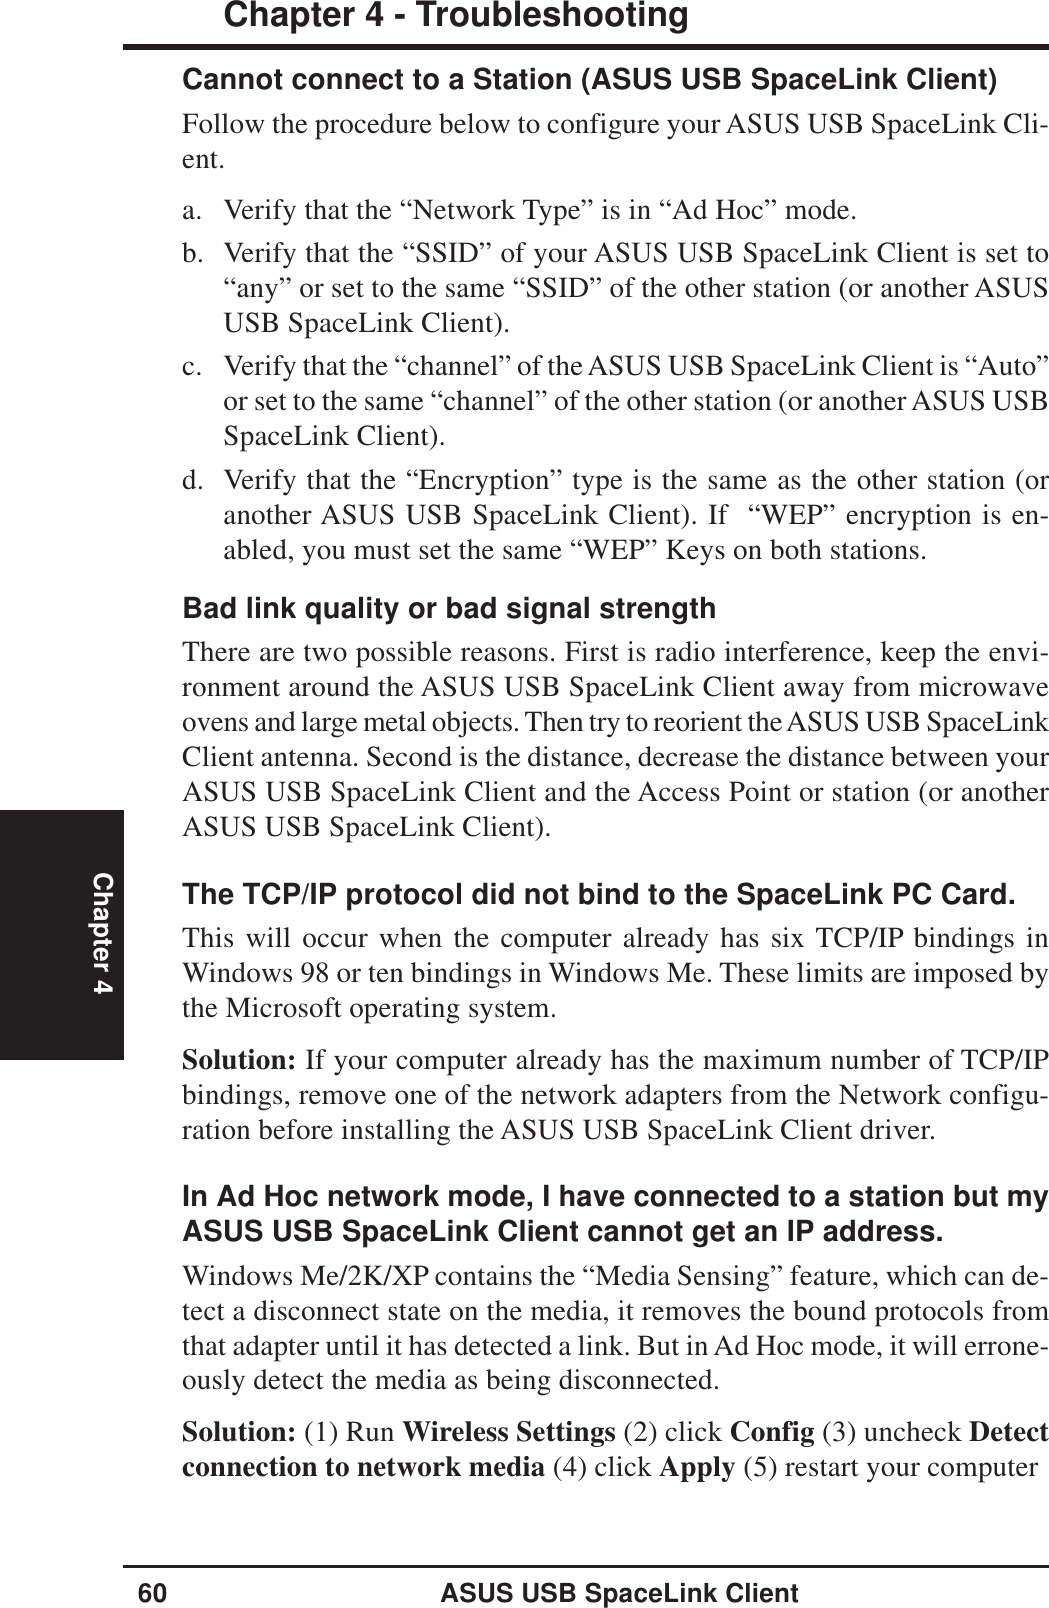 60 ASUS USB SpaceLink ClientChapter 4 - TroubleshootingChapter 4Cannot connect to a Station (ASUS USB SpaceLink Client)Follow the procedure below to configure your ASUS USB SpaceLink Cli-ent.a. Verify that the “Network Type” is in “Ad Hoc” mode.b. Verify that the “SSID” of your ASUS USB SpaceLink Client is set to“any” or set to the same “SSID” of the other station (or another ASUSUSB SpaceLink Client).c. Verify that the “channel” of the ASUS USB SpaceLink Client is “Auto”or set to the same “channel” of the other station (or another ASUS USBSpaceLink Client).d. Verify that the “Encryption” type is the same as the other station (oranother ASUS USB SpaceLink Client). If  “WEP” encryption is en-abled, you must set the same “WEP” Keys on both stations.Bad link quality or bad signal strengthThere are two possible reasons. First is radio interference, keep the envi-ronment around the ASUS USB SpaceLink Client away from microwaveovens and large metal objects. Then try to reorient the ASUS USB SpaceLinkClient antenna. Second is the distance, decrease the distance between yourASUS USB SpaceLink Client and the Access Point or station (or anotherASUS USB SpaceLink Client).The TCP/IP protocol did not bind to the SpaceLink PC Card.This will occur when the computer already has six TCP/IP bindings inWindows 98 or ten bindings in Windows Me. These limits are imposed bythe Microsoft operating system.Solution: If your computer already has the maximum number of TCP/IPbindings, remove one of the network adapters from the Network configu-ration before installing the ASUS USB SpaceLink Client driver.In Ad Hoc network mode, I have connected to a station but myASUS USB SpaceLink Client cannot get an IP address.Windows Me/2K/XP contains the “Media Sensing” feature, which can de-tect a disconnect state on the media, it removes the bound protocols fromthat adapter until it has detected a link. But in Ad Hoc mode, it will errone-ously detect the media as being disconnected.Solution: (1) Run Wireless Settings (2) click Config (3) uncheck Detectconnection to network media (4) click Apply (5) restart your computer